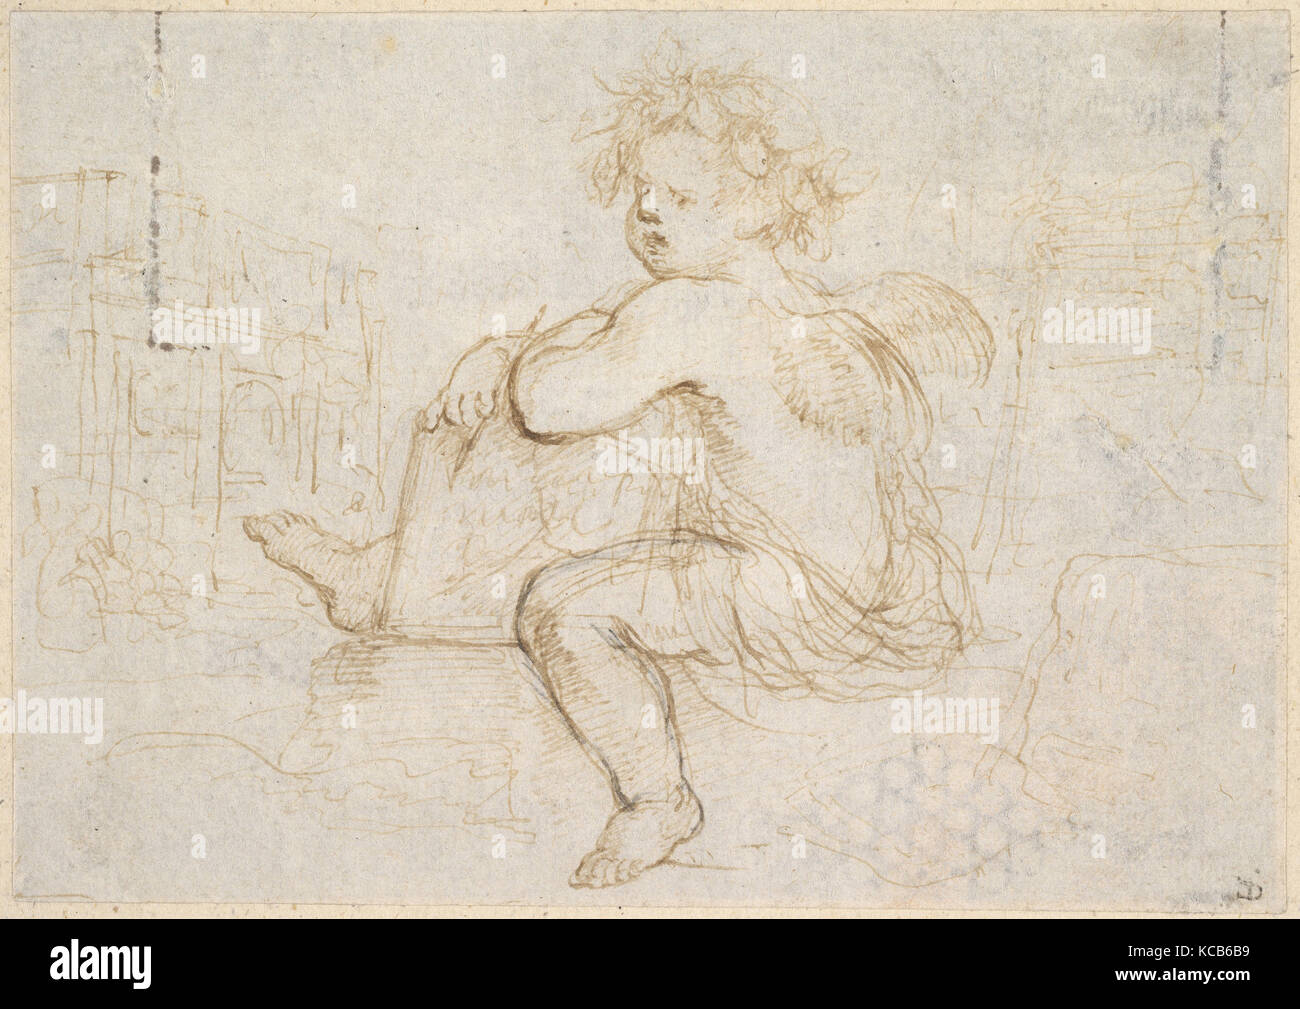 Genie of Drawing, 1610–64, Pen and brown ink, Sheet: 3 5/8 x 5 3/16 in. (9.2 x 13.2 cm), Drawings, Stefano della Bella (Italian Stock Photo